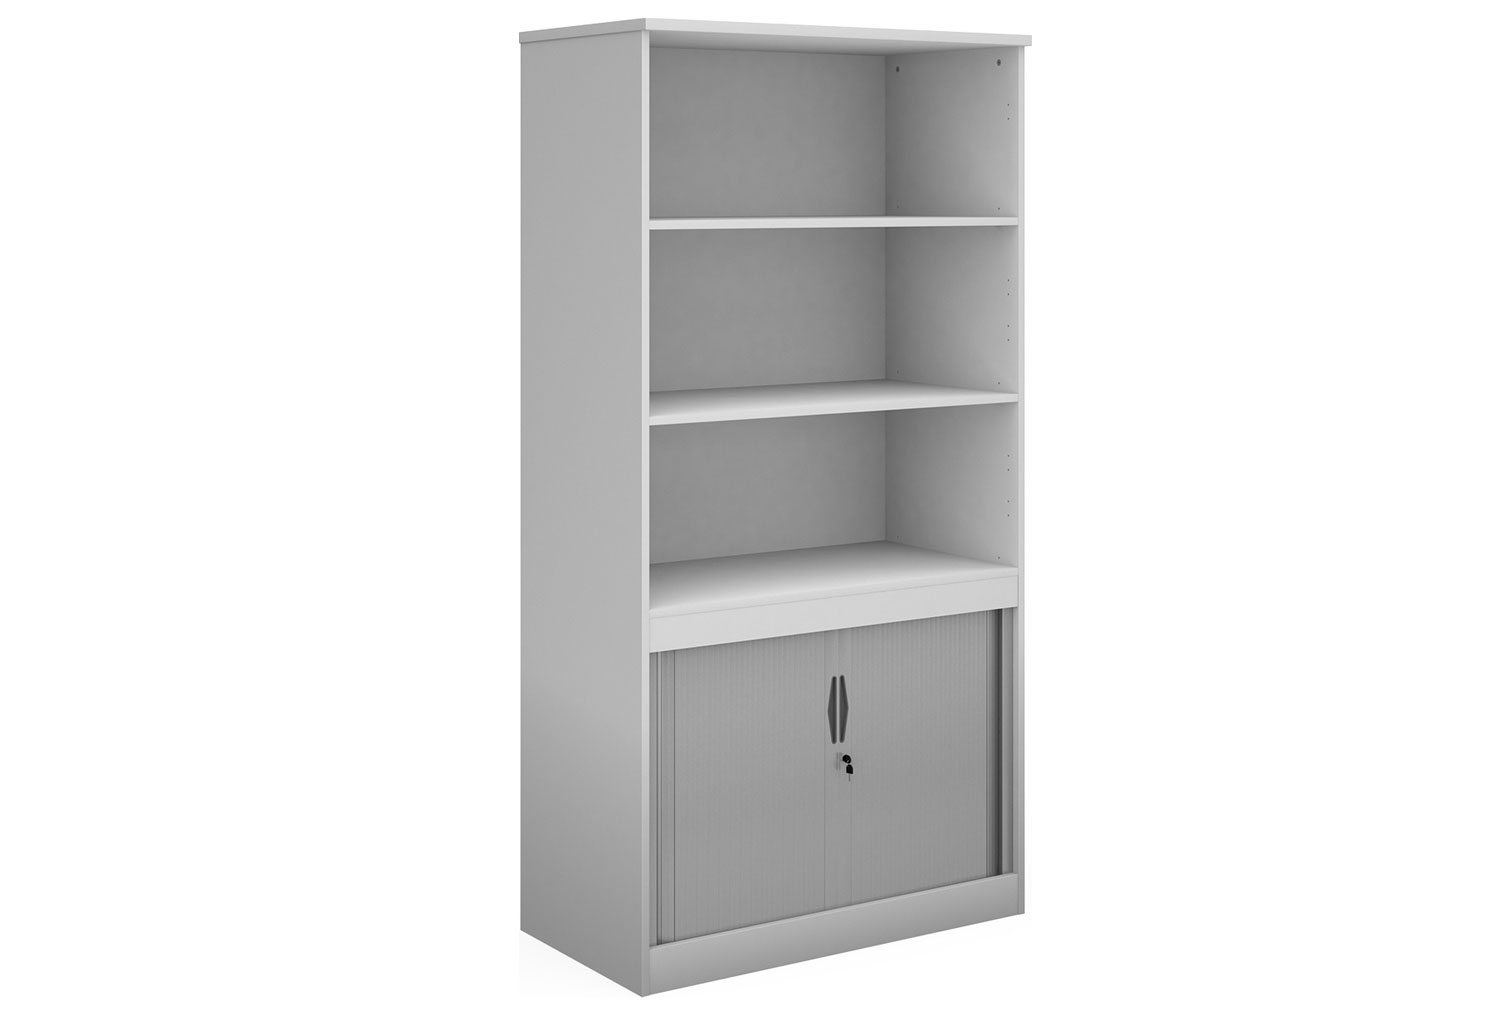 All White Premium Systems Multi Storage Open Top Tambour Office Cupboards, 3 Shelf - 102wx55dx200h (cm), Fully Installed